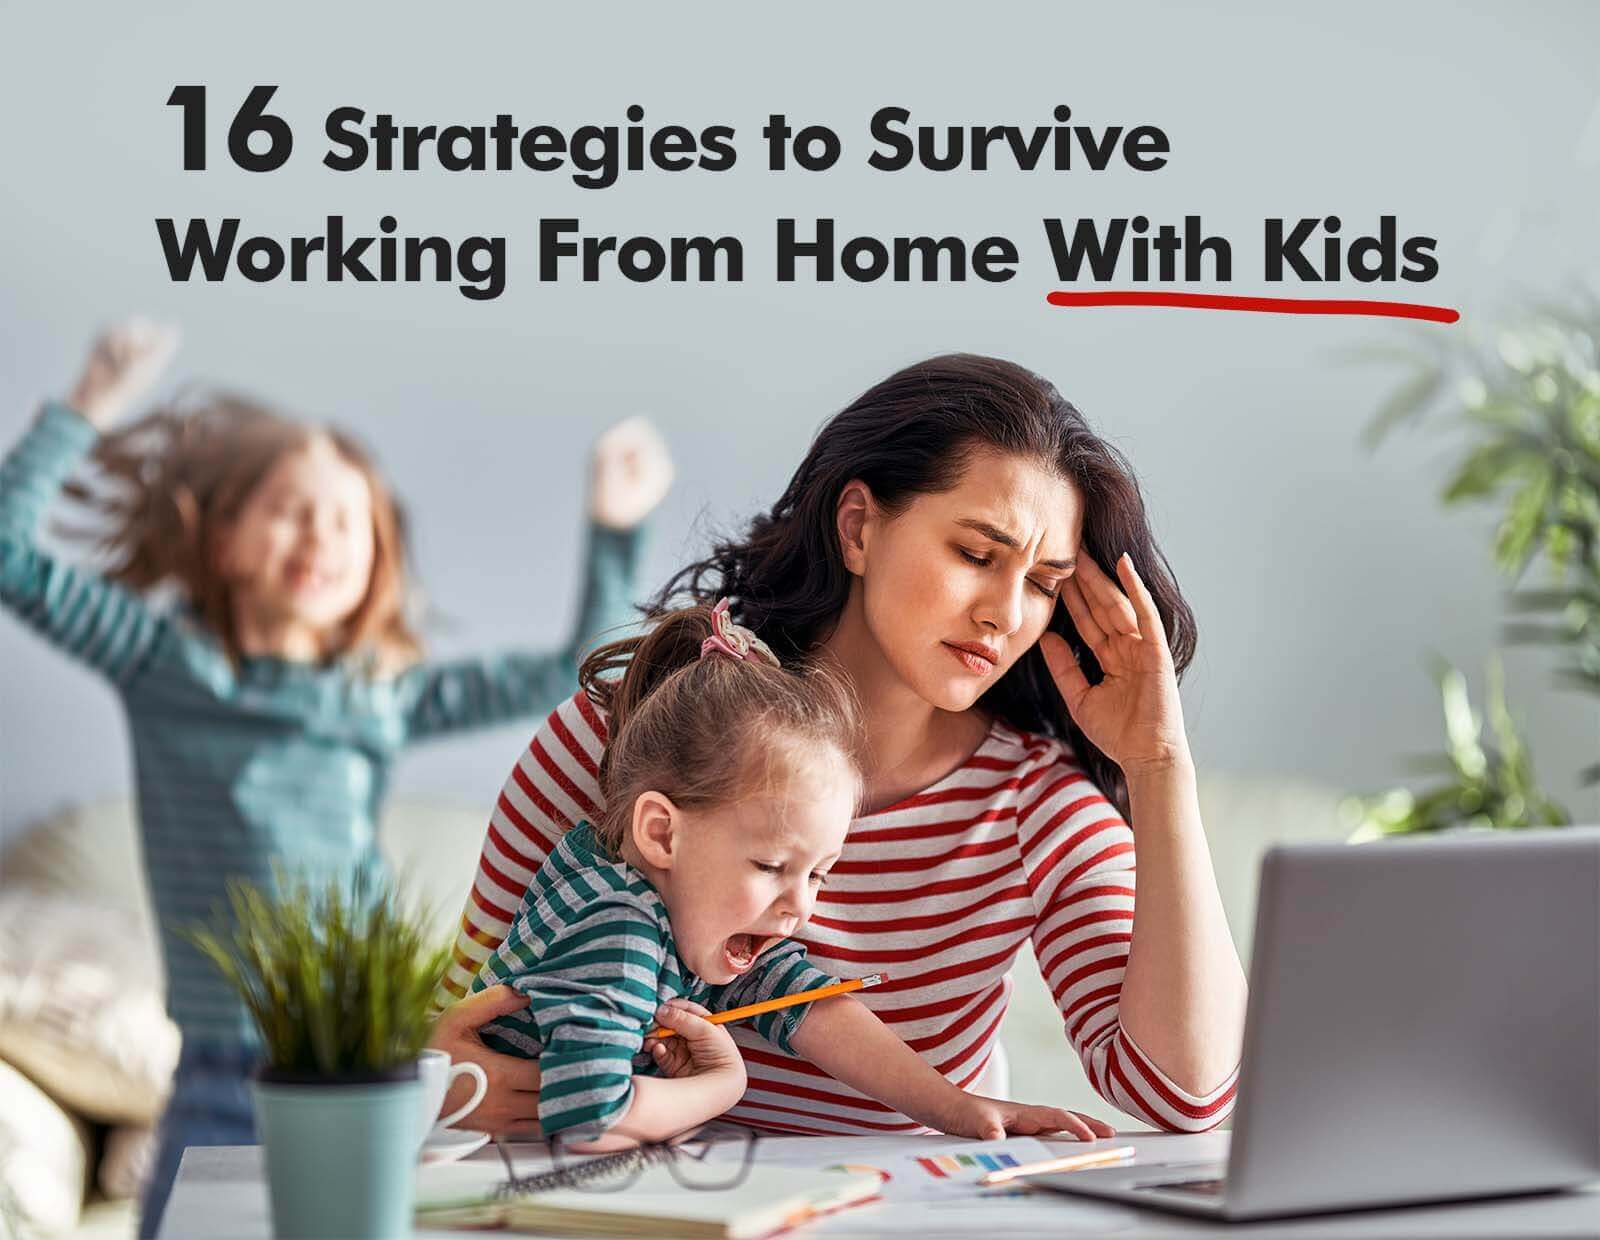 https://compareinternet.com/blog/16-strategies-to-survive-working-from-home-with-kids/